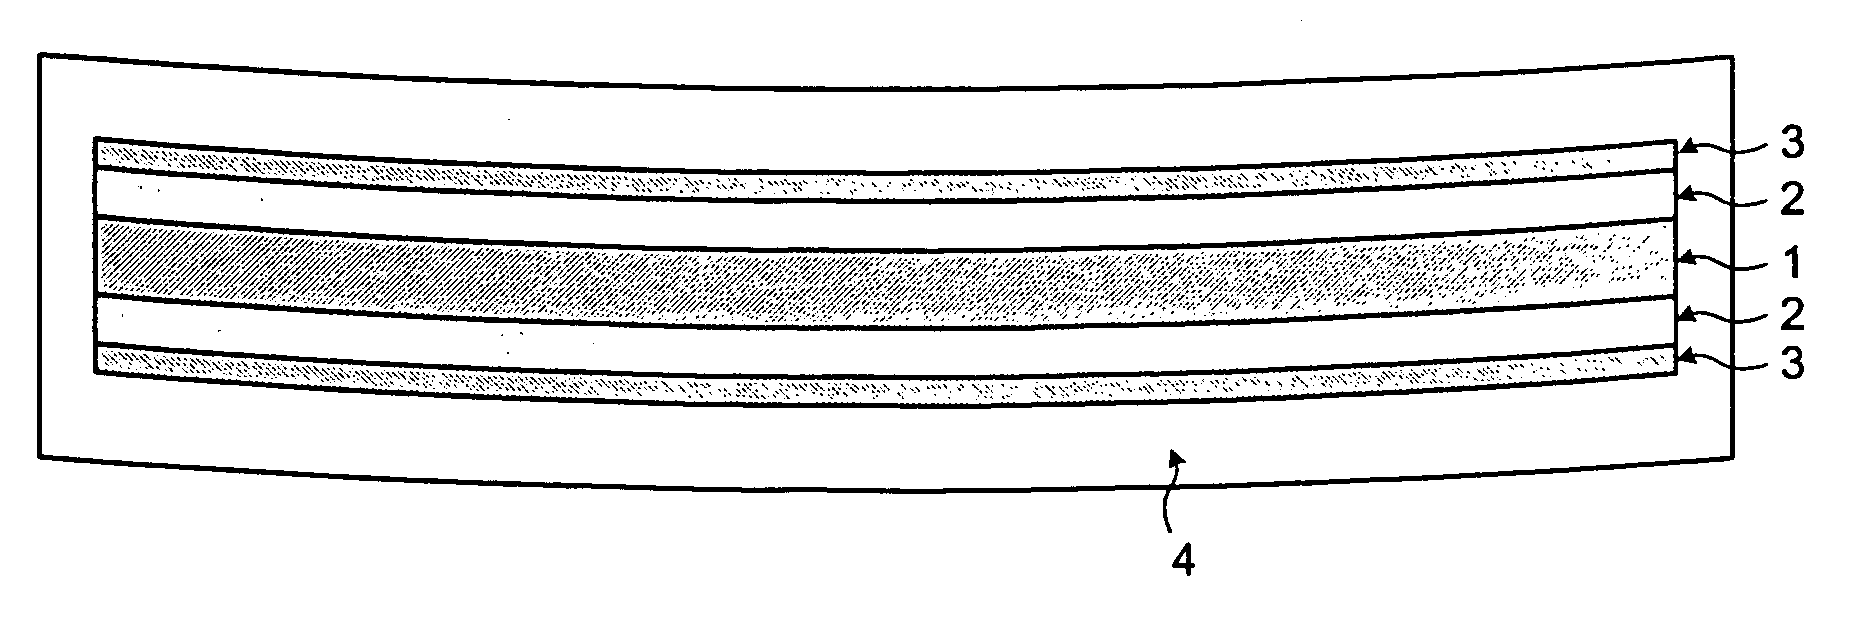 Light control plastic lens, coated sheet-like light control element for the lens production, and a production method for light control plastic lens